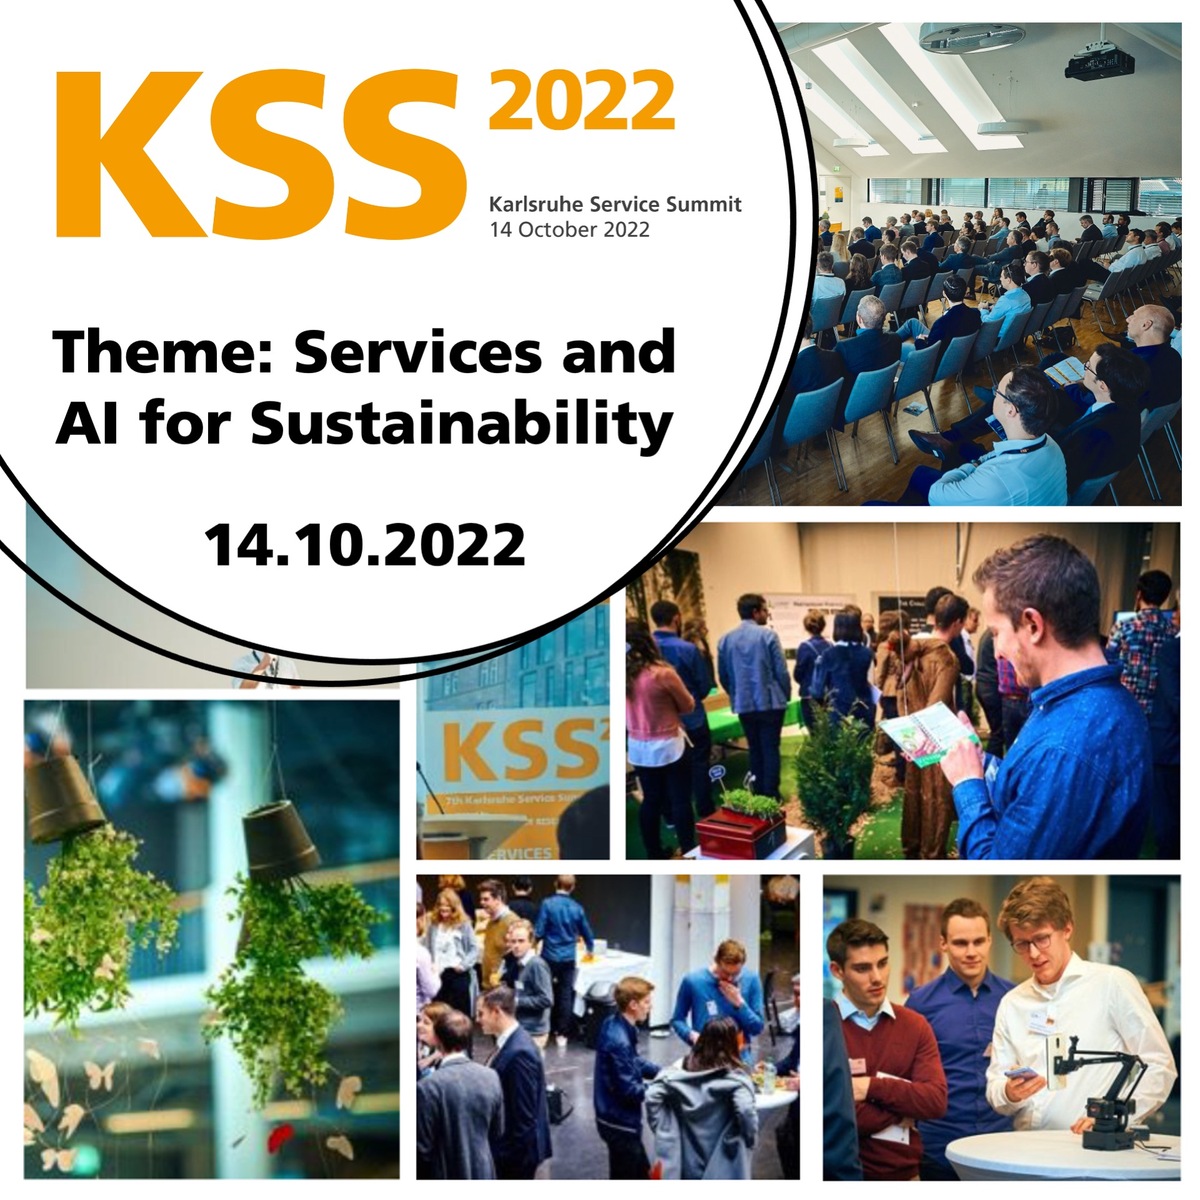 Karlsruhe Service Summit 2022 on October 14th